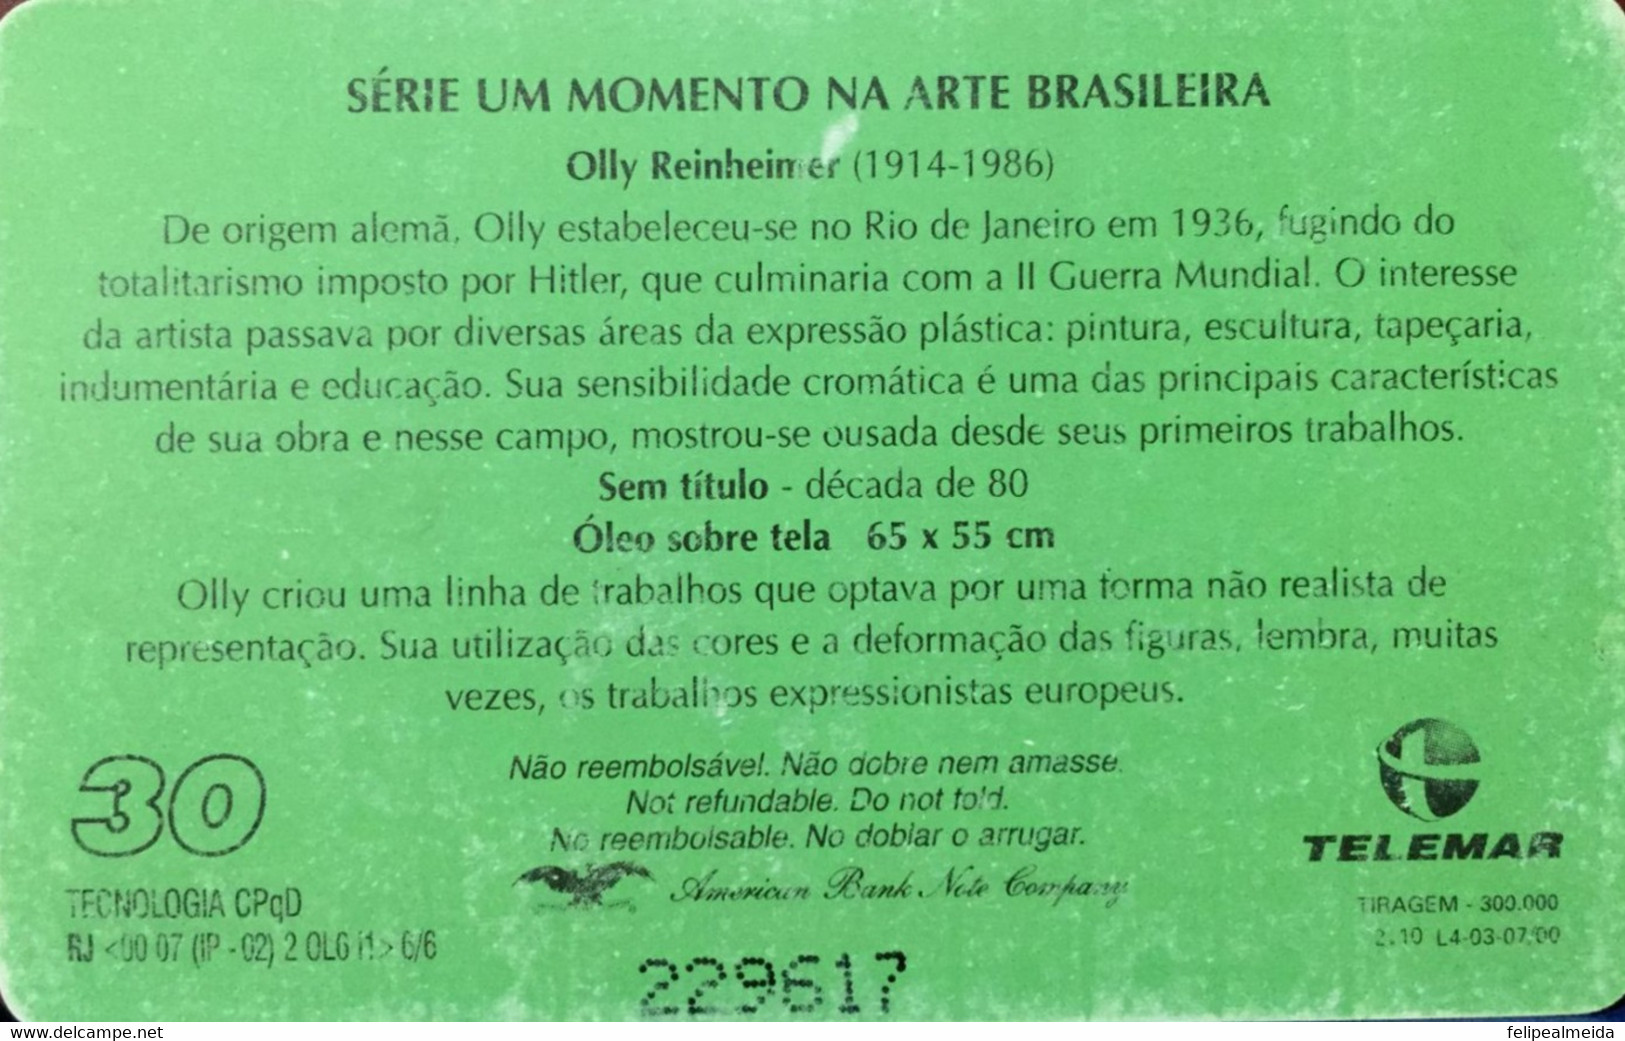 Phone Card Manufactured By Telemar In 2000 - Series A Moment In Brazilian Art - Artist Olly Reinheimeier 1914 To 1986 - Kultur